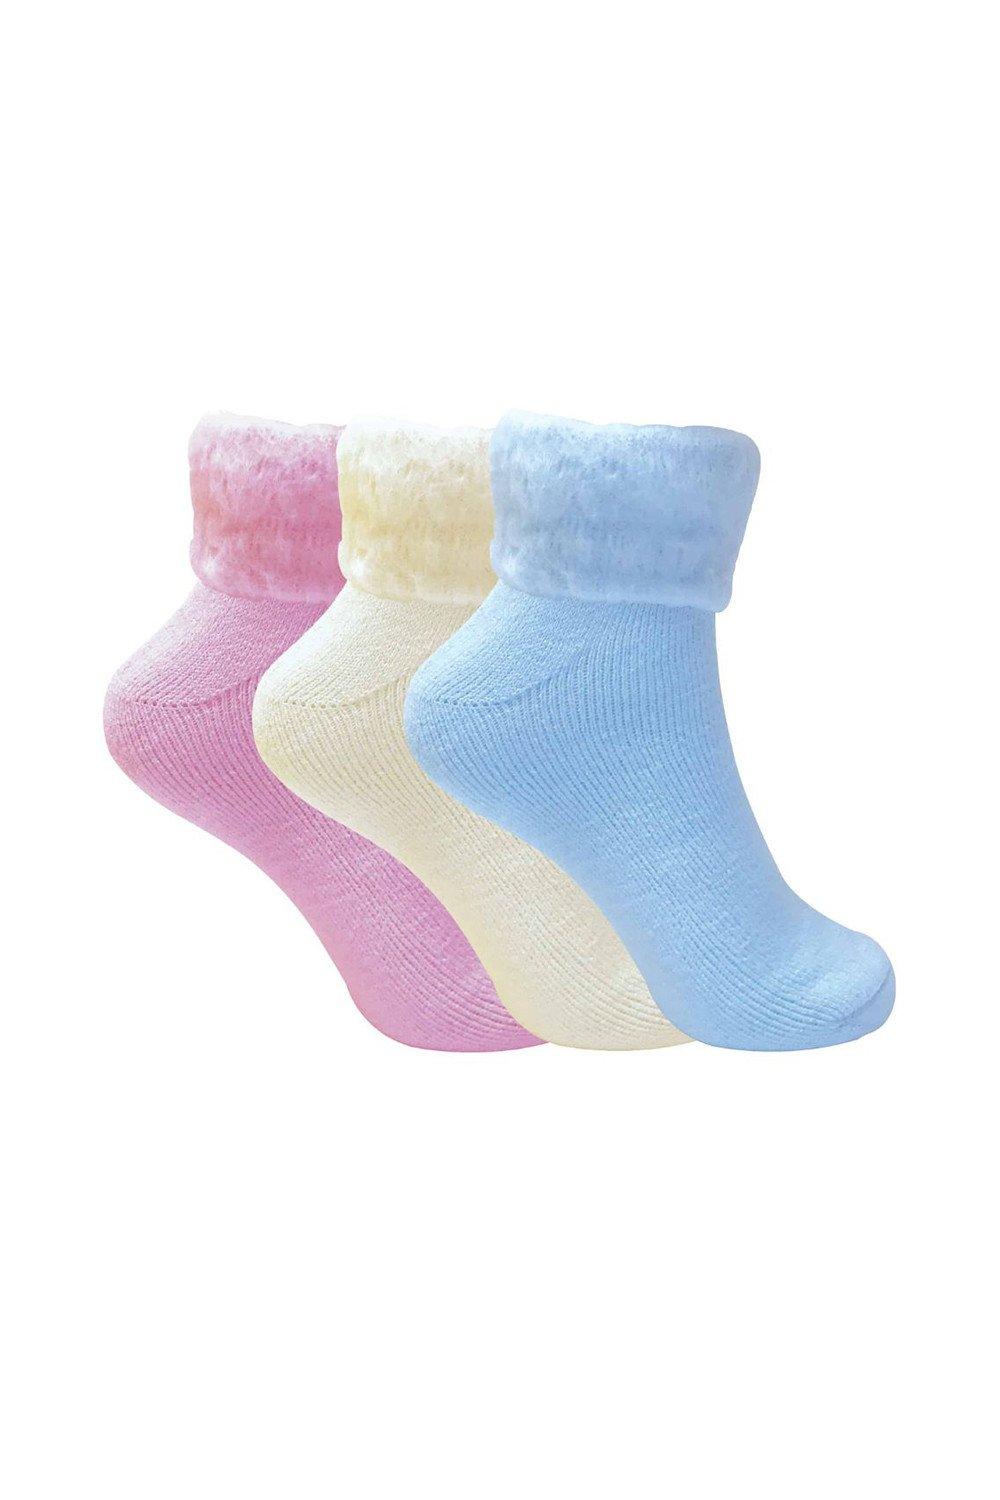 3 Pairs Warm Soft Thermal Low Cut Ankle Fluffy Winter Bed Socks